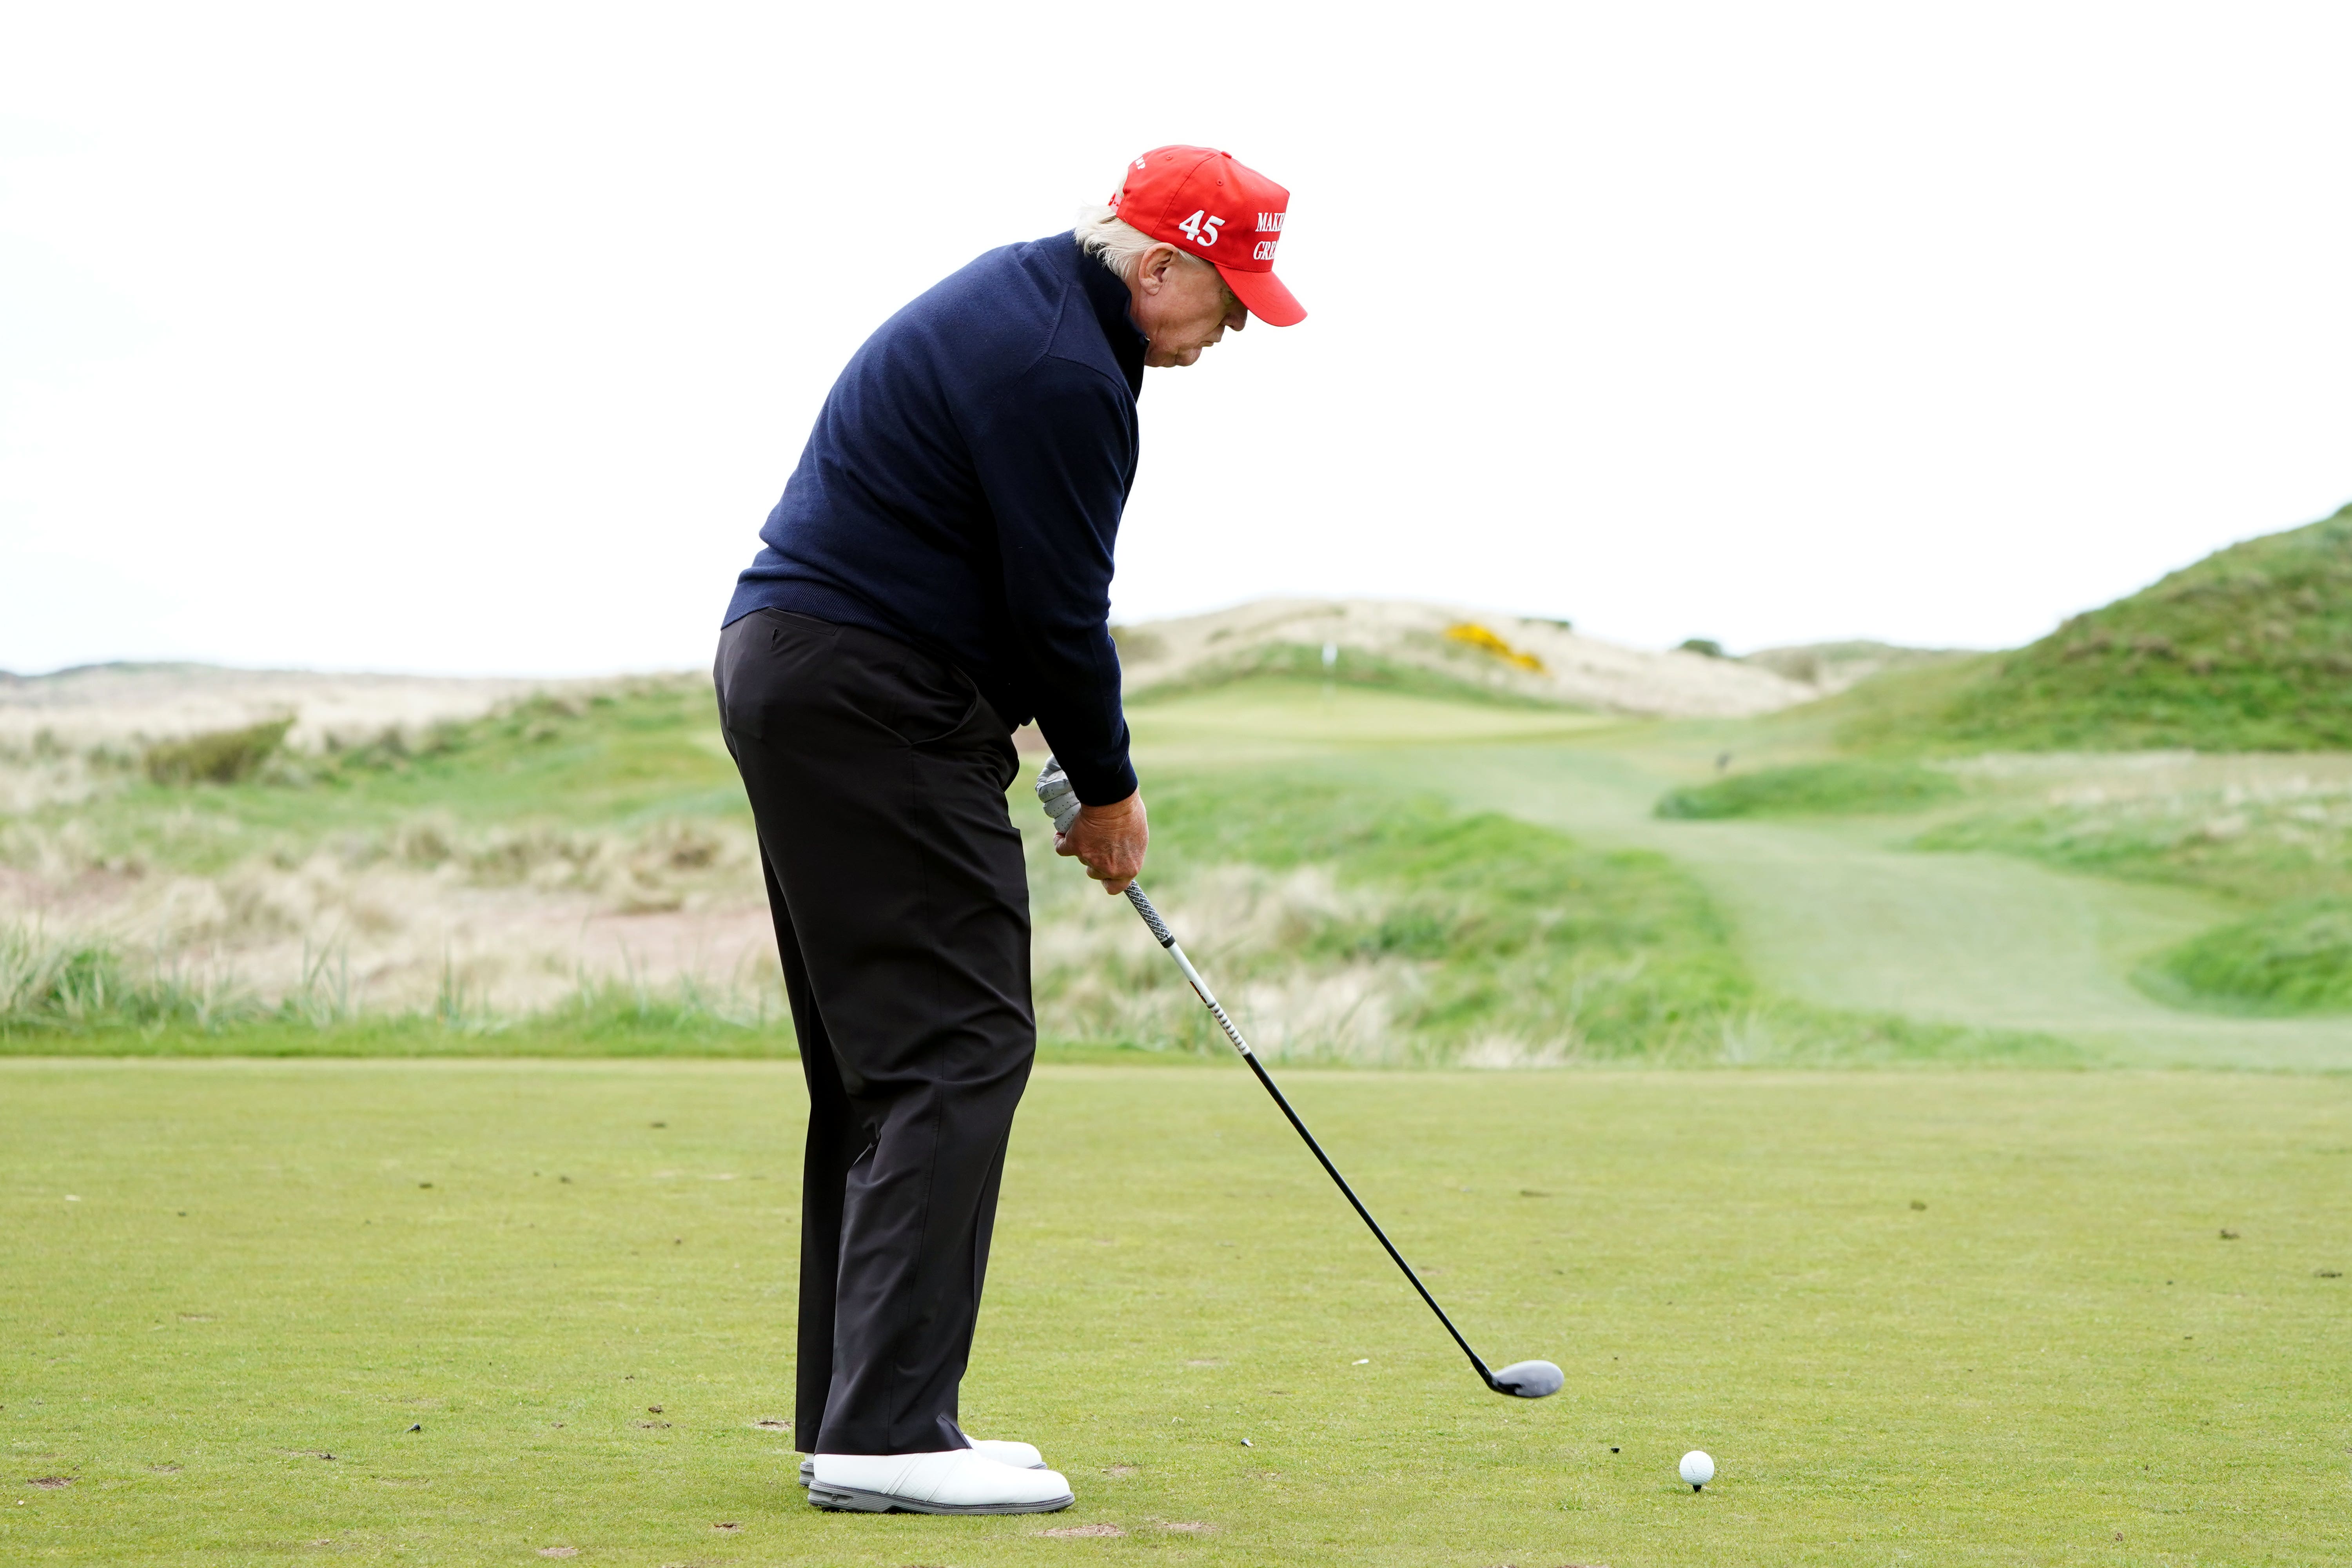 Donald Trump plays golf at his Turnberry course during Scottish visit